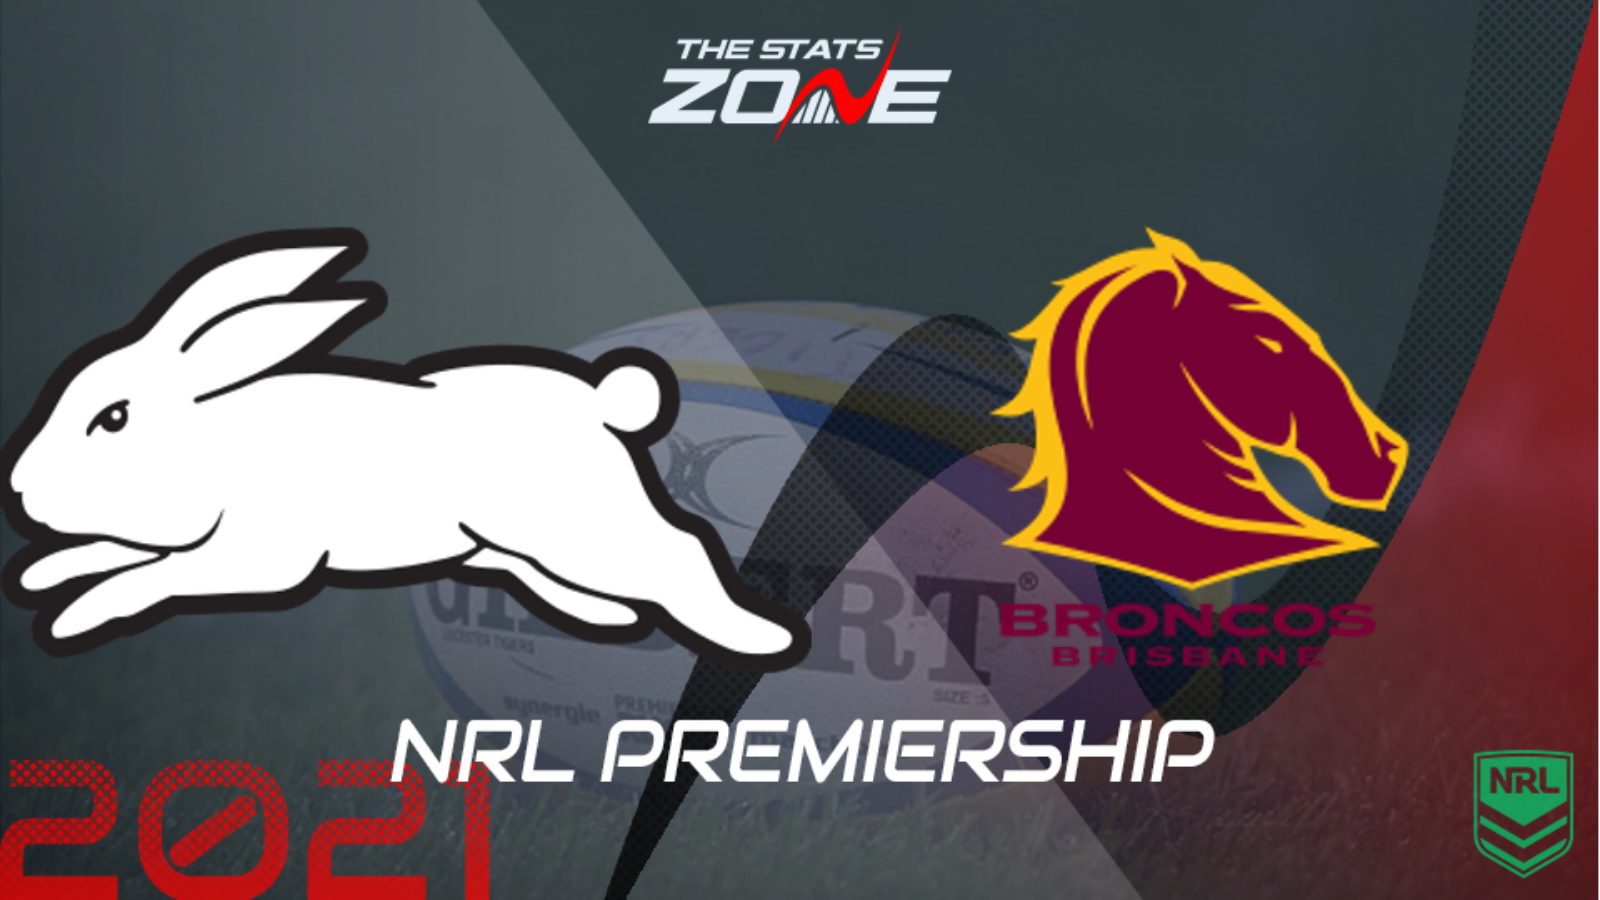 2021 Nrl South Sydney Rabbitohs Vs Brisbane Broncos Preview And Prediction The Stats Zone 9200